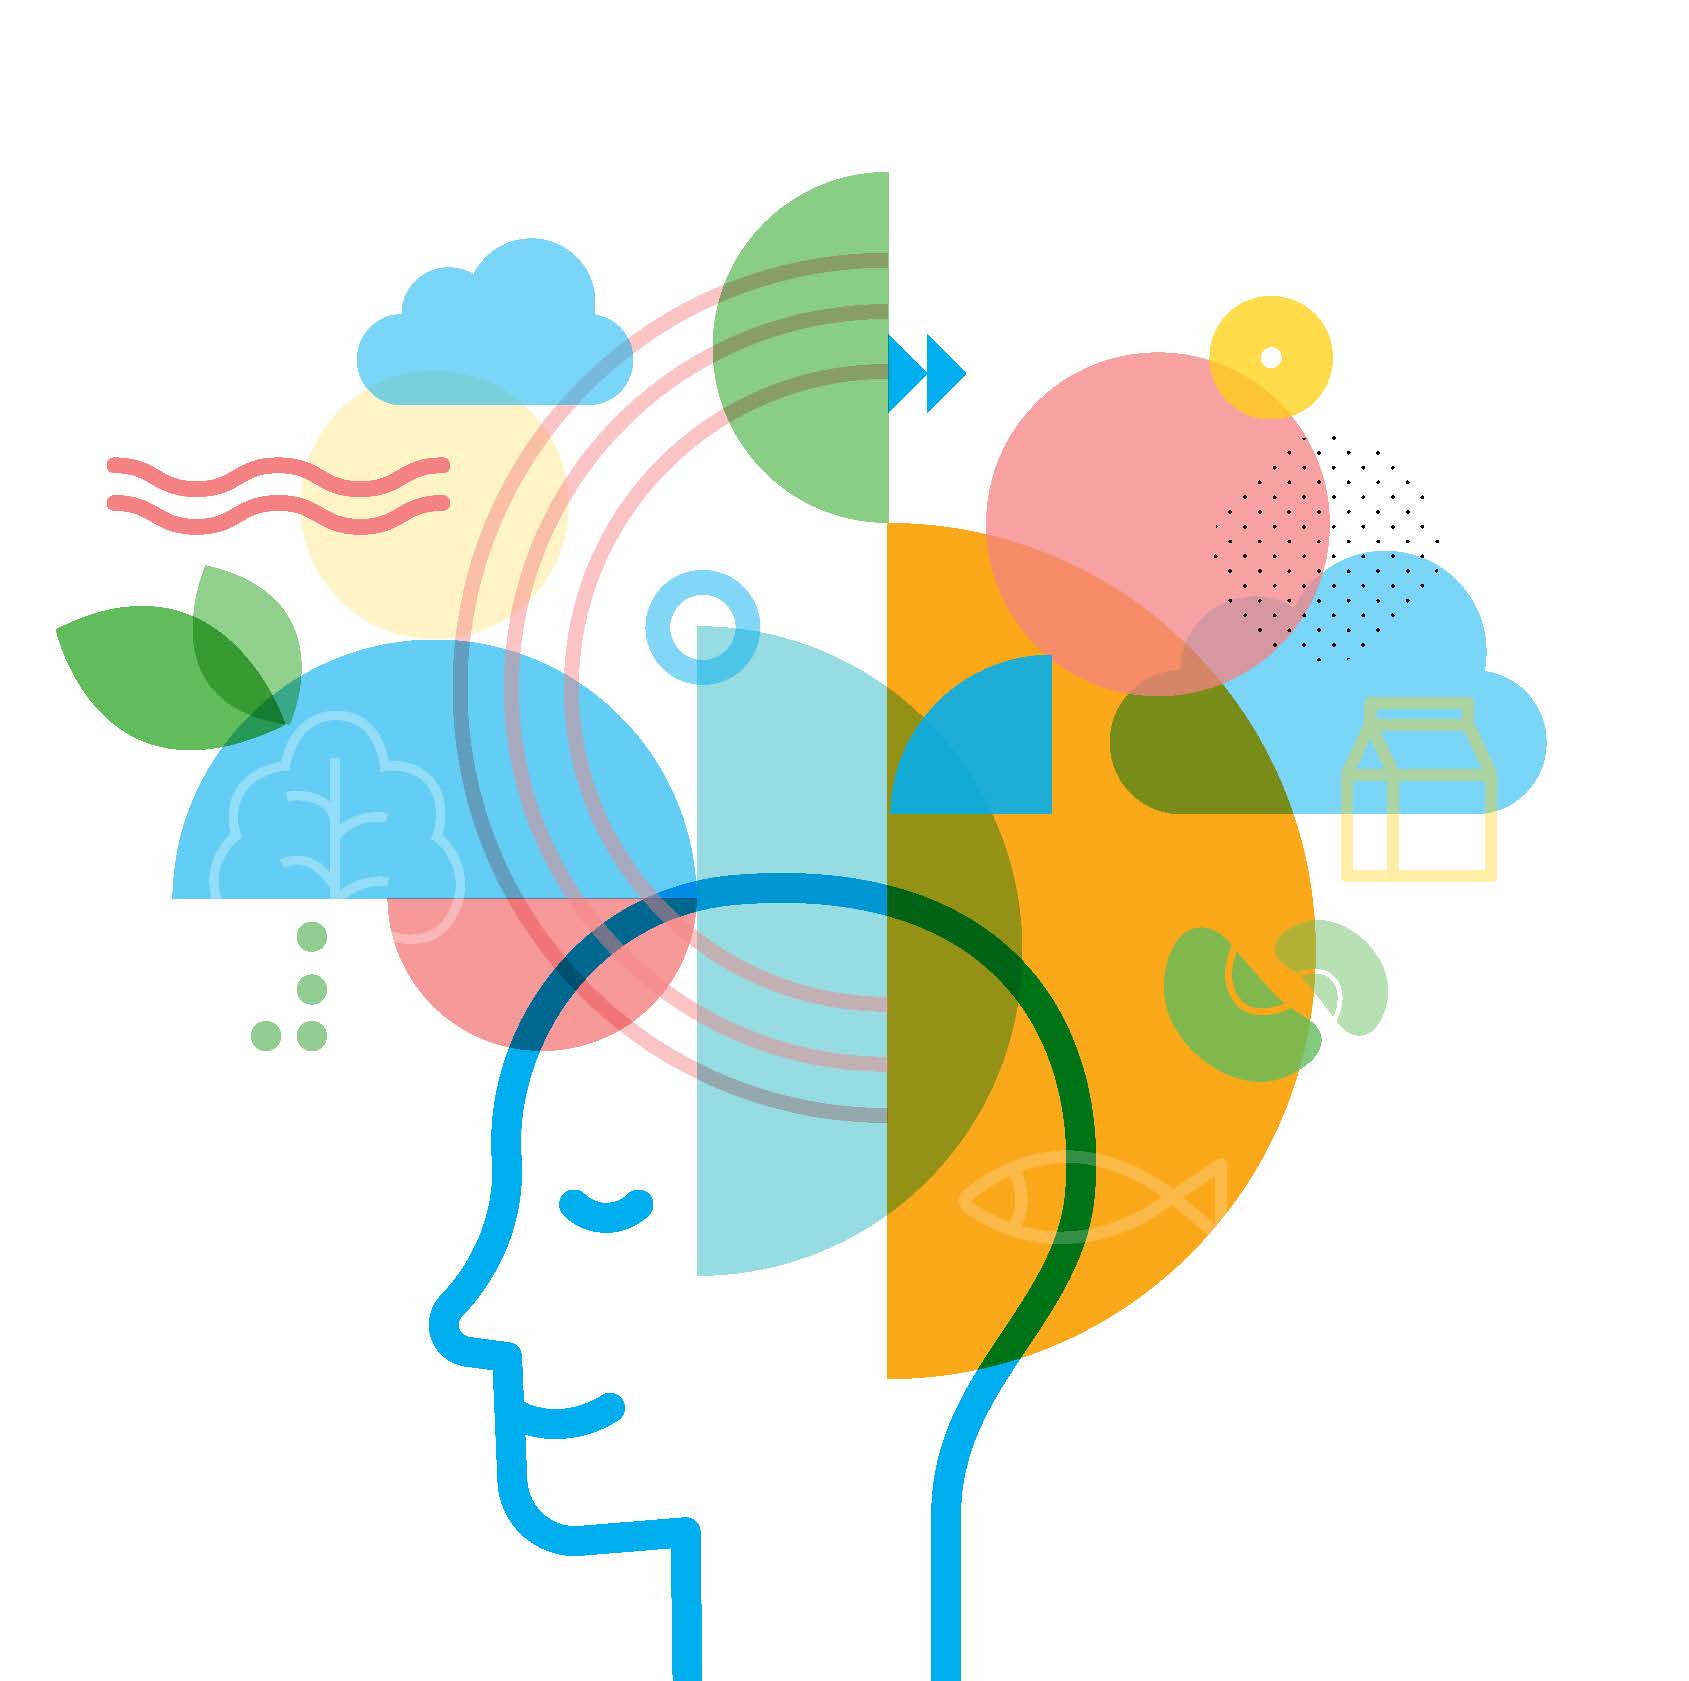 Graphic image of shape of head with abstract shapes and food images surrounding.